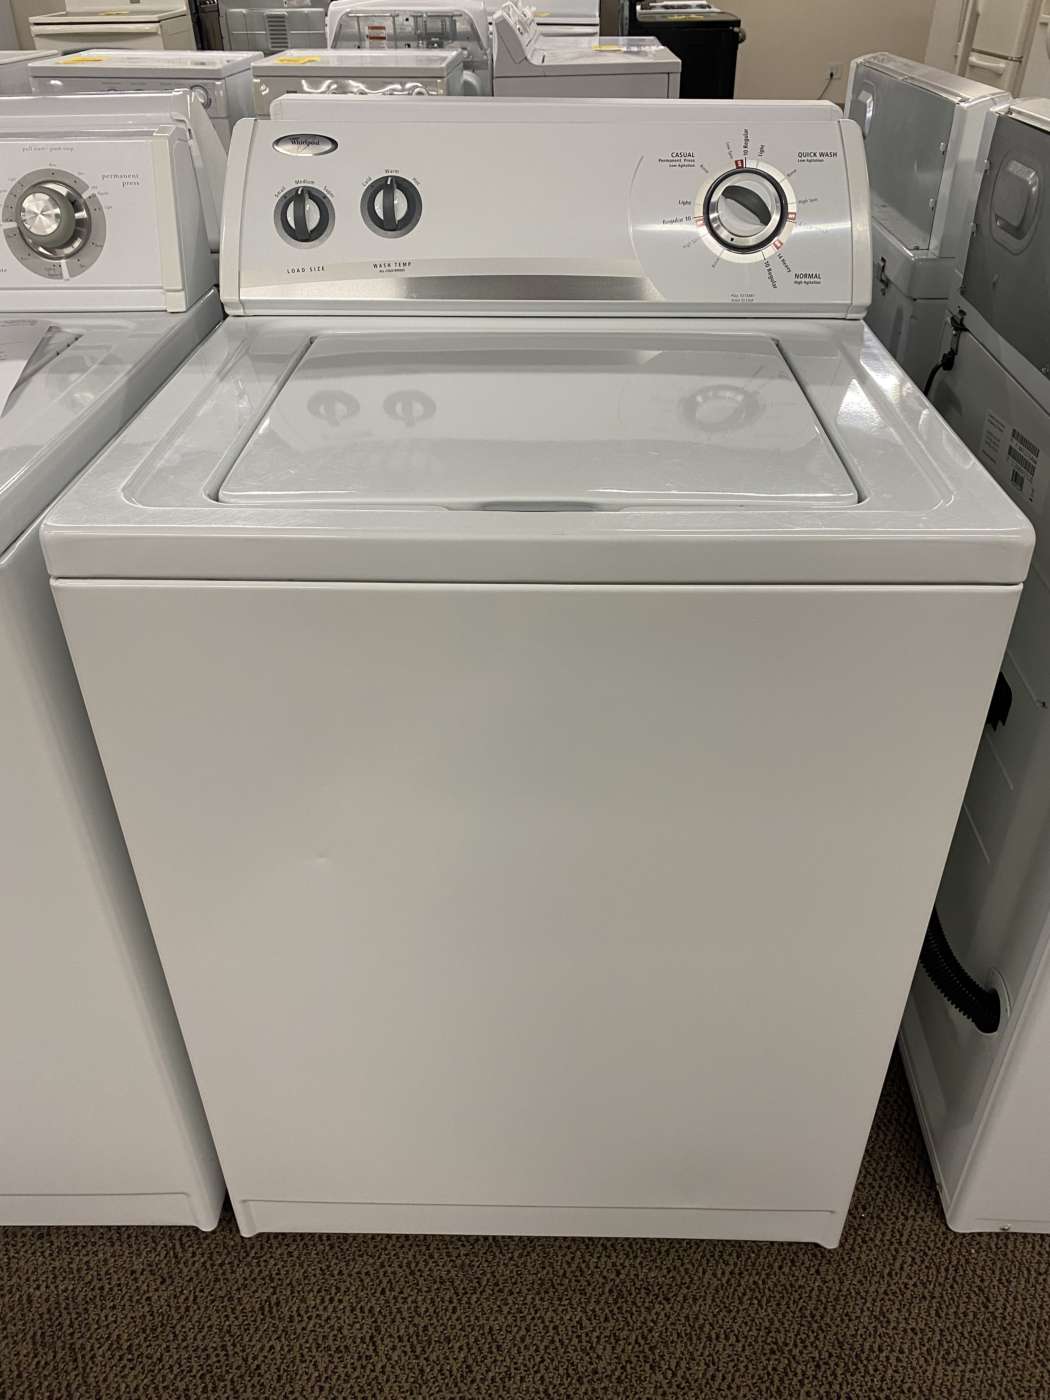 Reconditioned WHIRLPOOL 3.2 Cu. Ft. Top-Load Washer – White